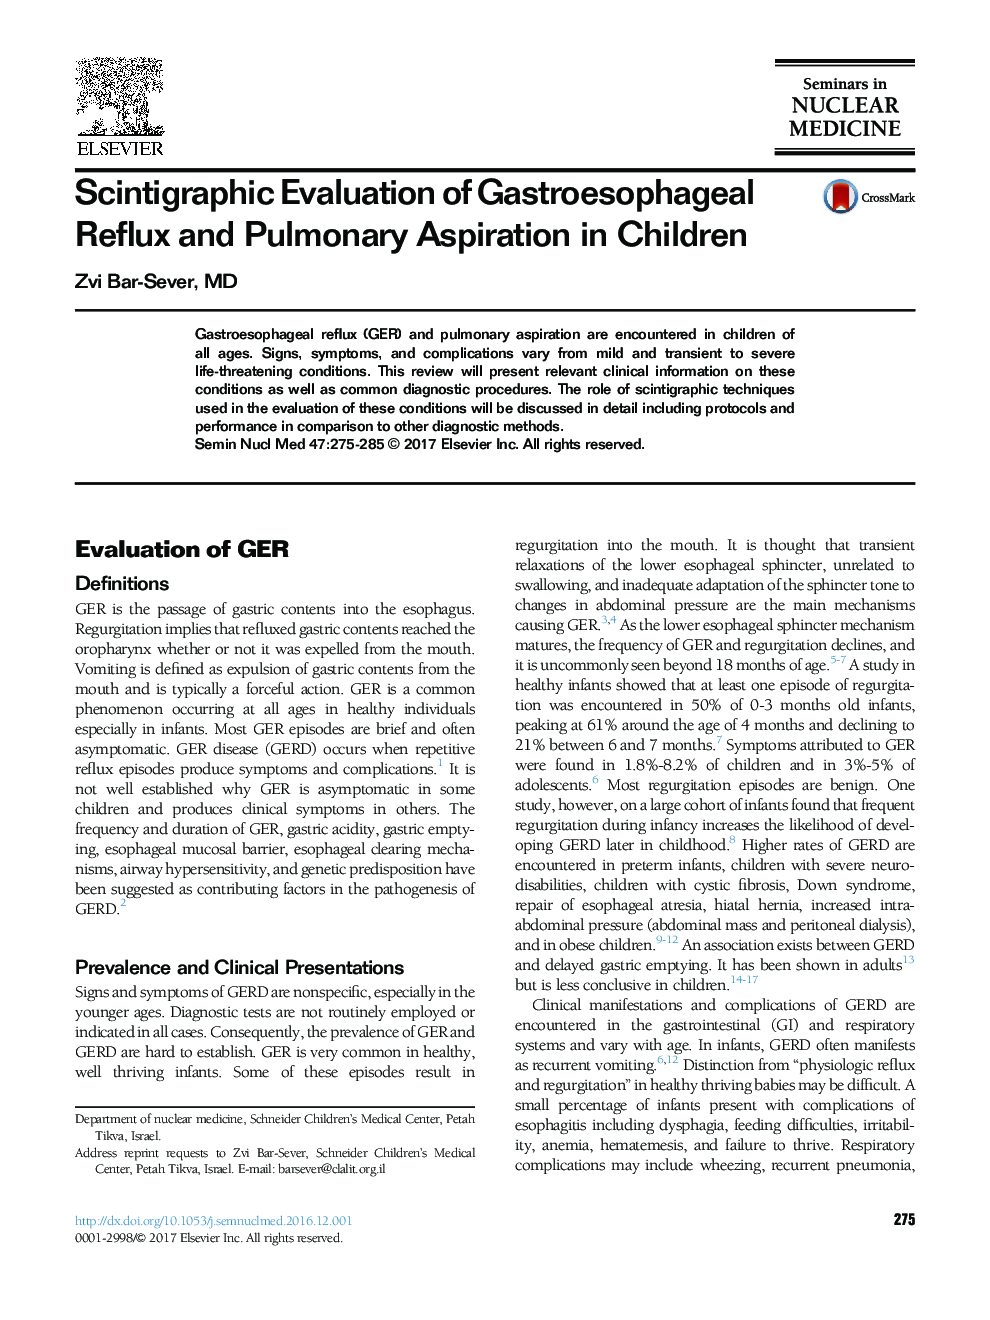 Scintigraphic Evaluation of Gastroesophageal Reflux and Pulmonary Aspiration in Children